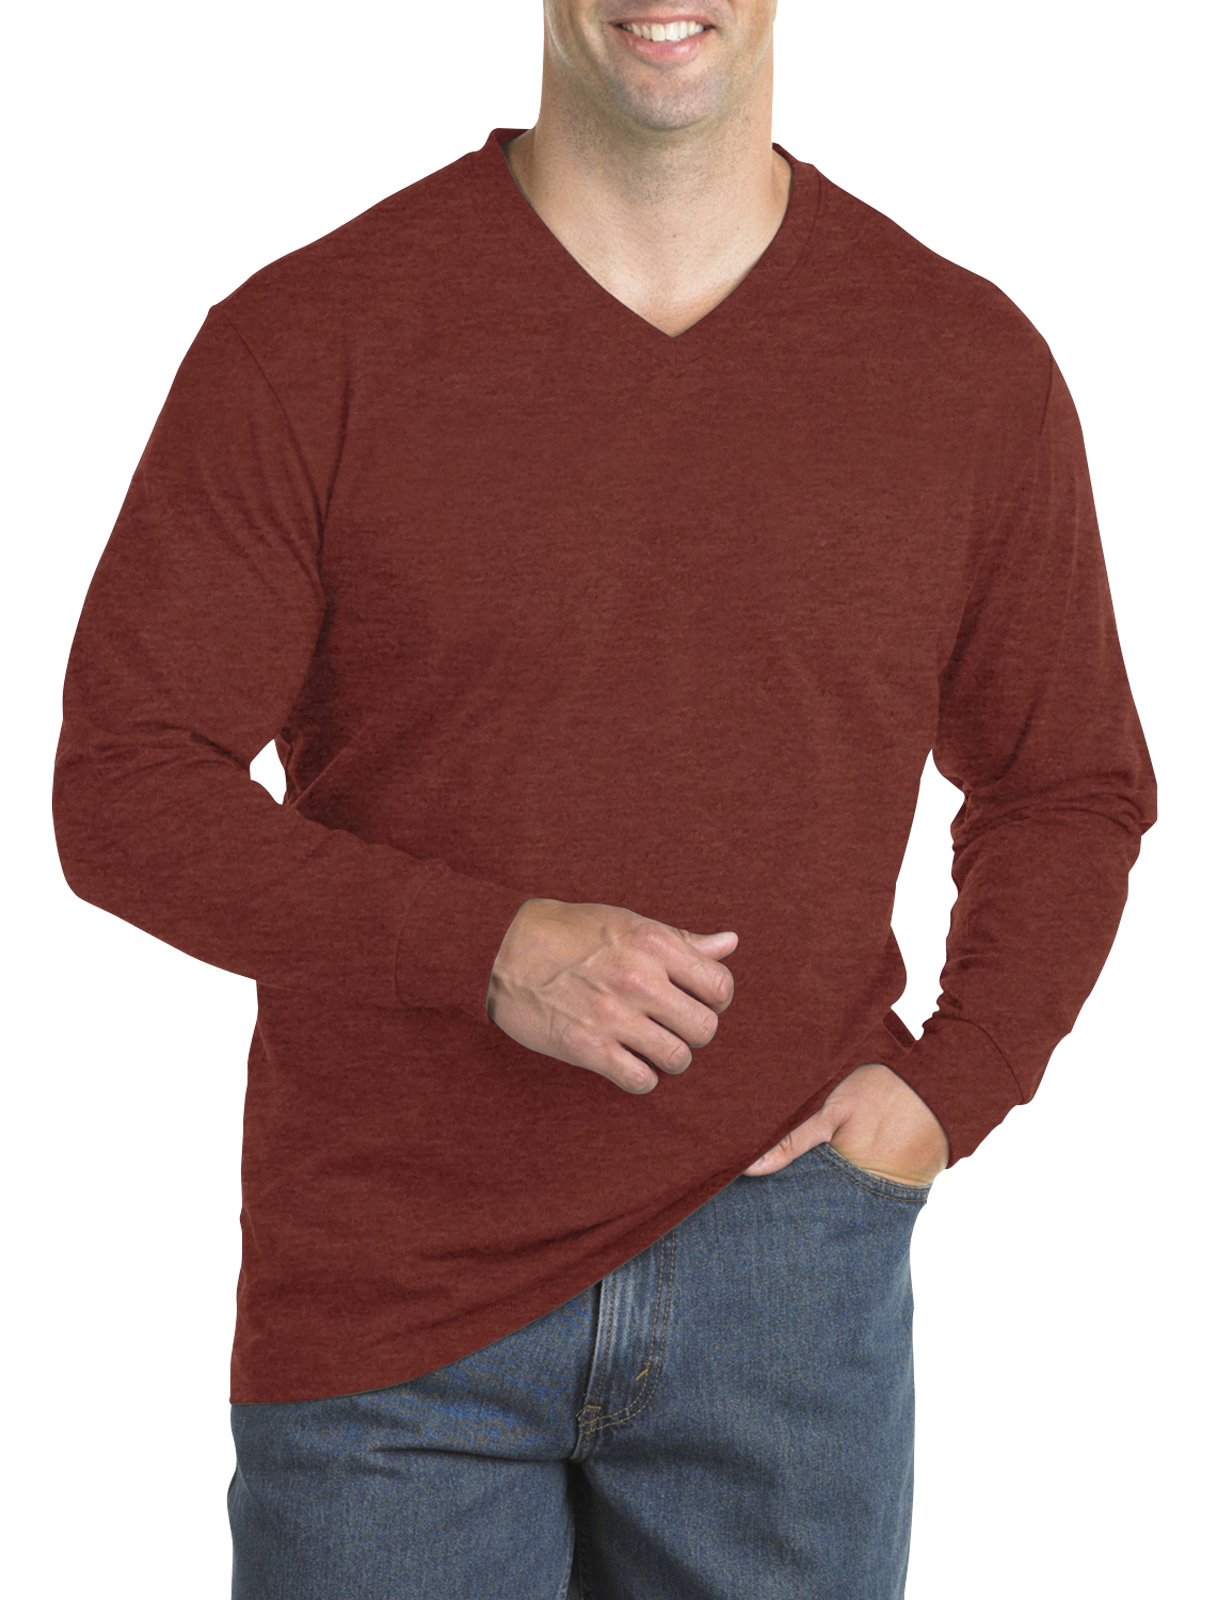 Harbor Bay Men's Big and Tall Wicking Jersey V-Neck Tee